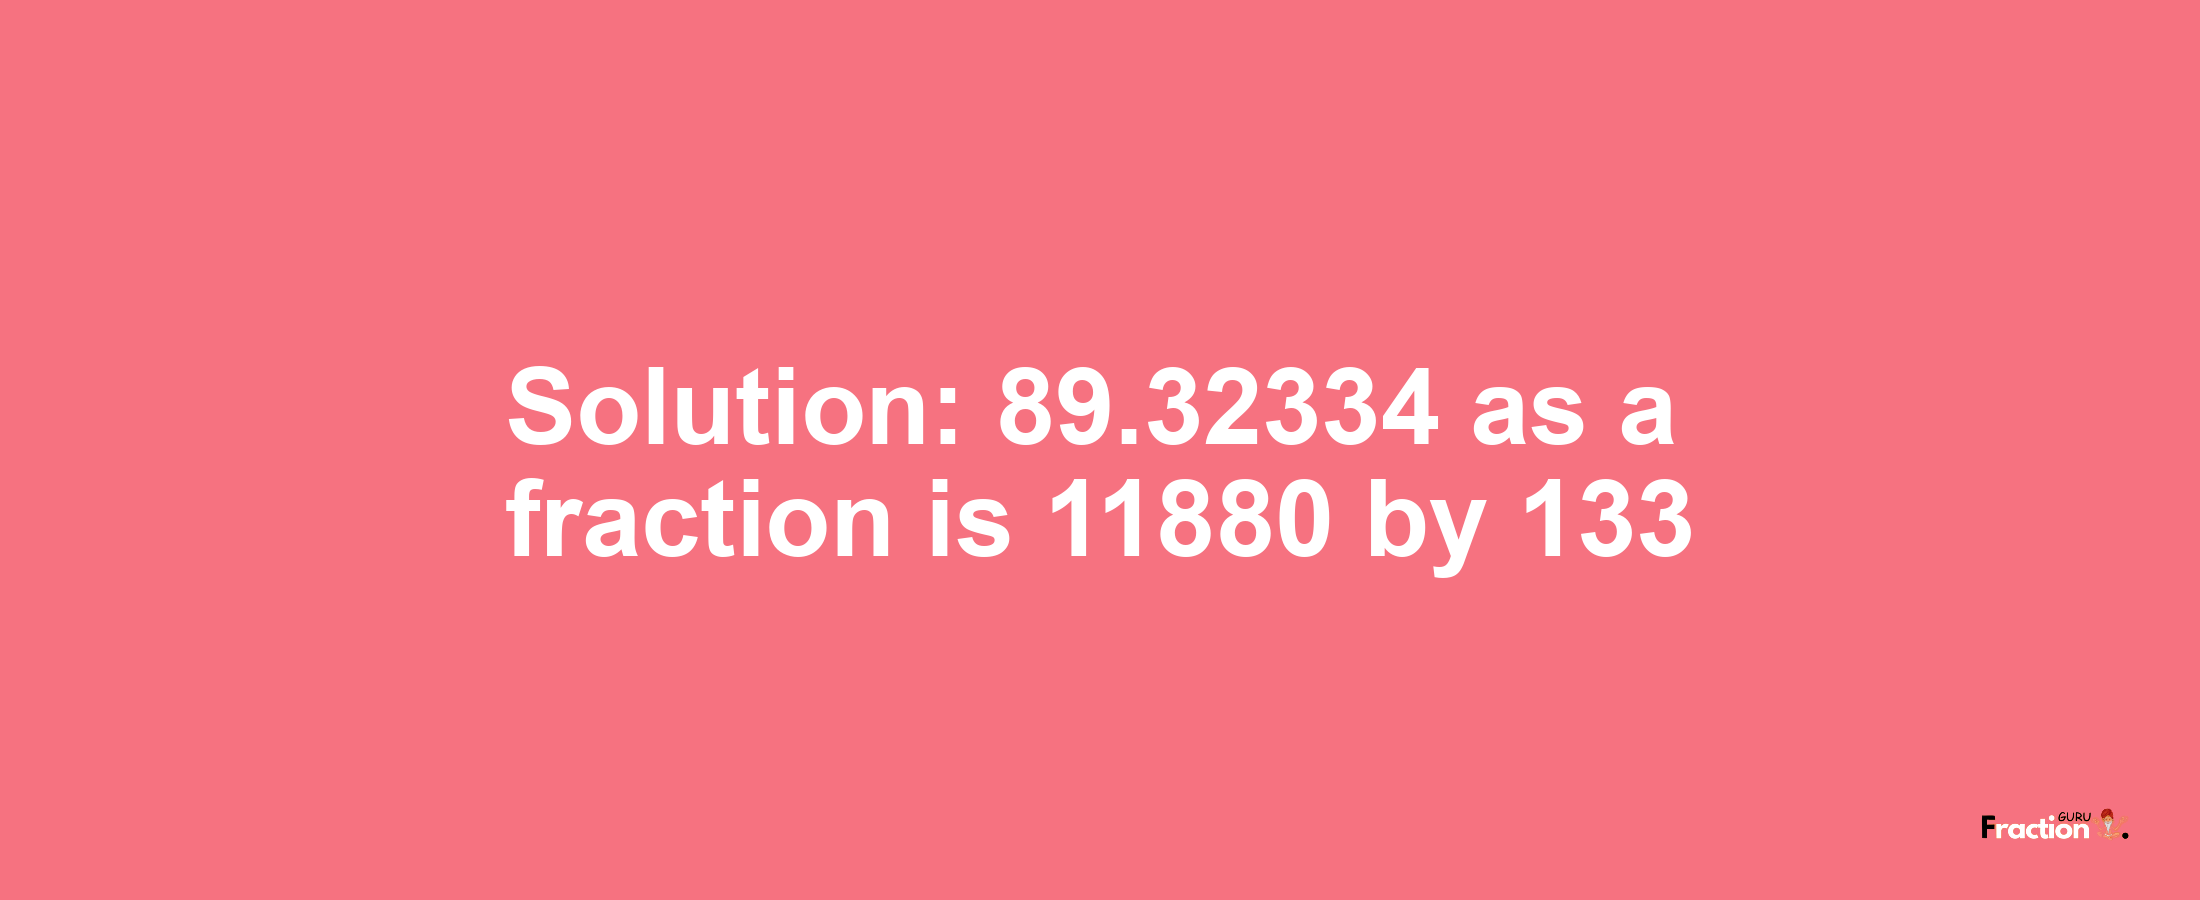 Solution:89.32334 as a fraction is 11880/133